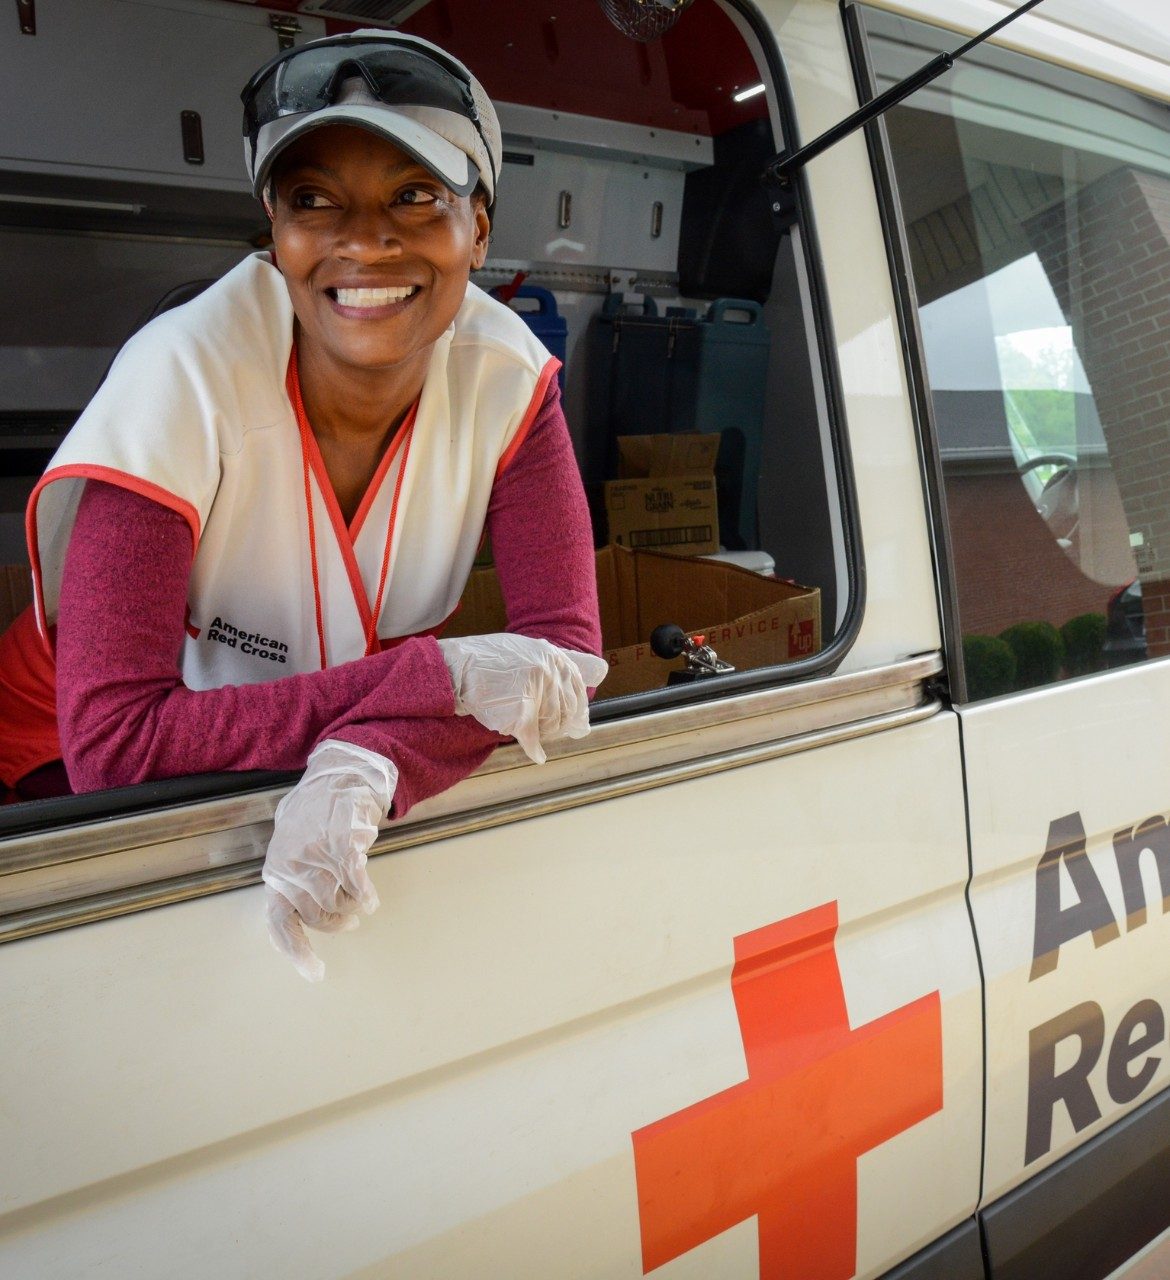 Red Cross volunteer in Red Cross vehicle looking out window and smiling